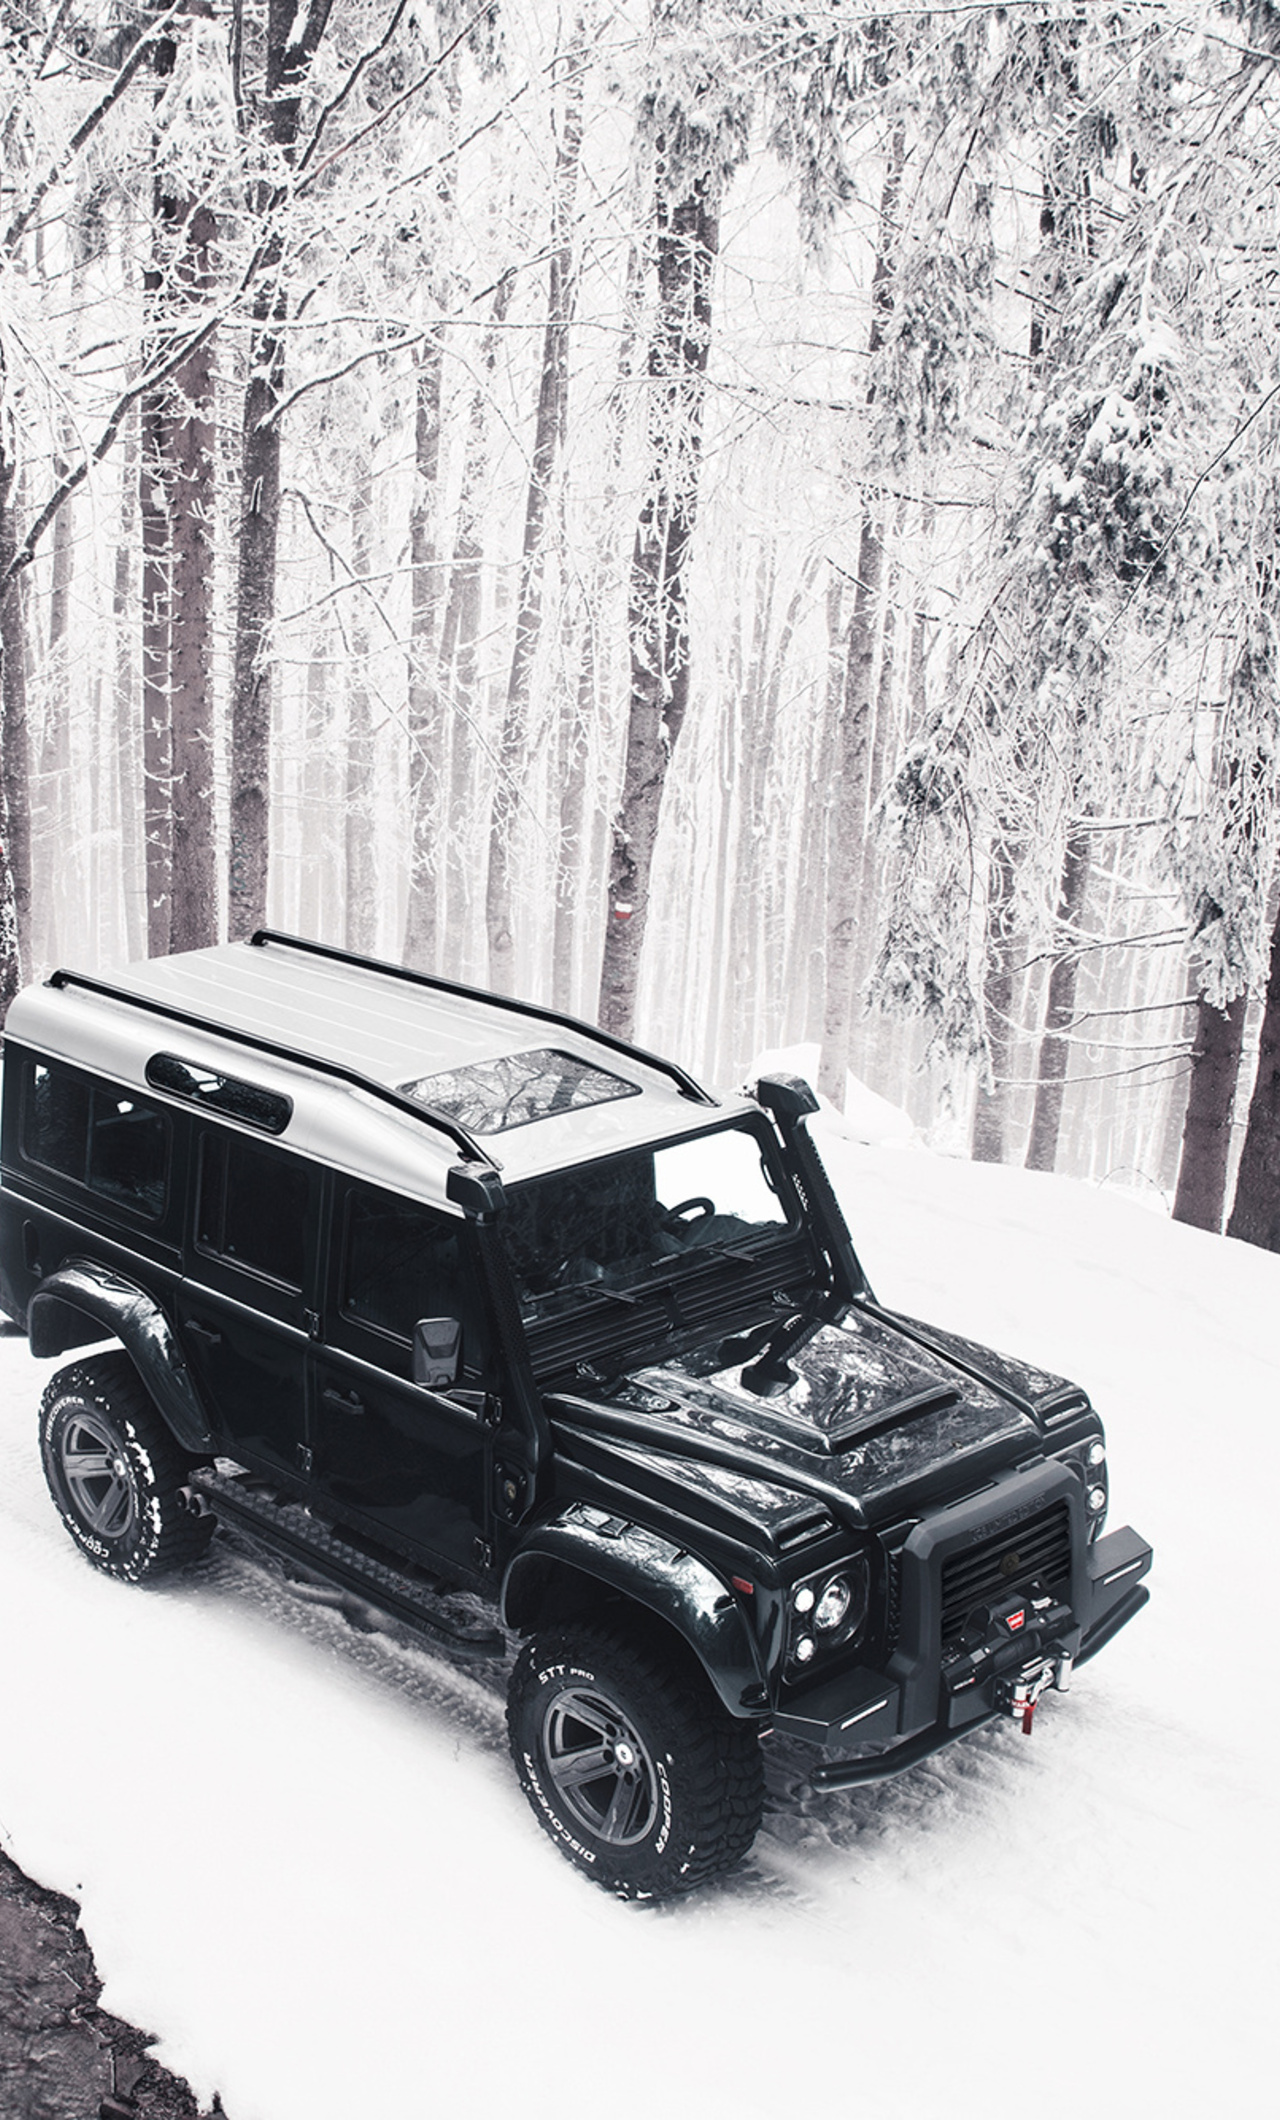 1280x2120 Ares Design Land Rover Defender 110 2018 Truck Iphone 6